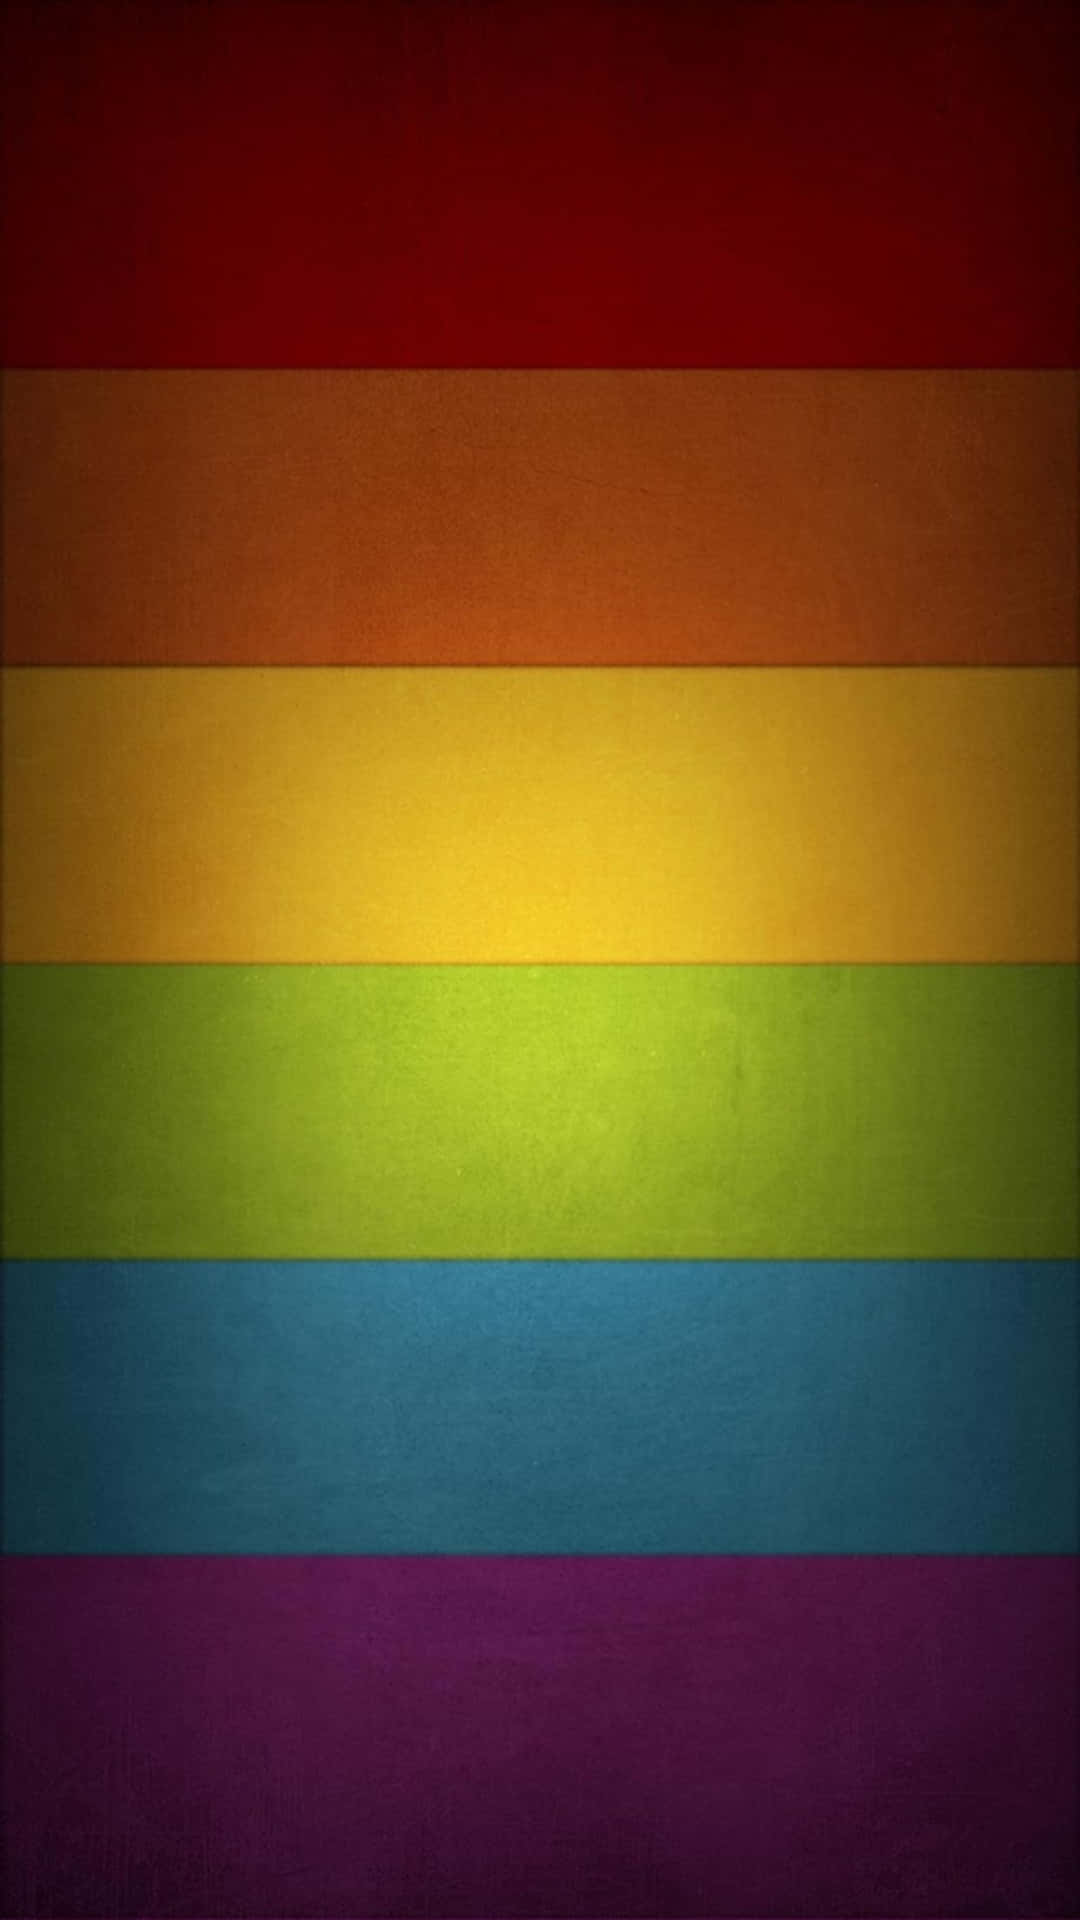 Show your True Colors with the LGBT iPhone Wallpaper